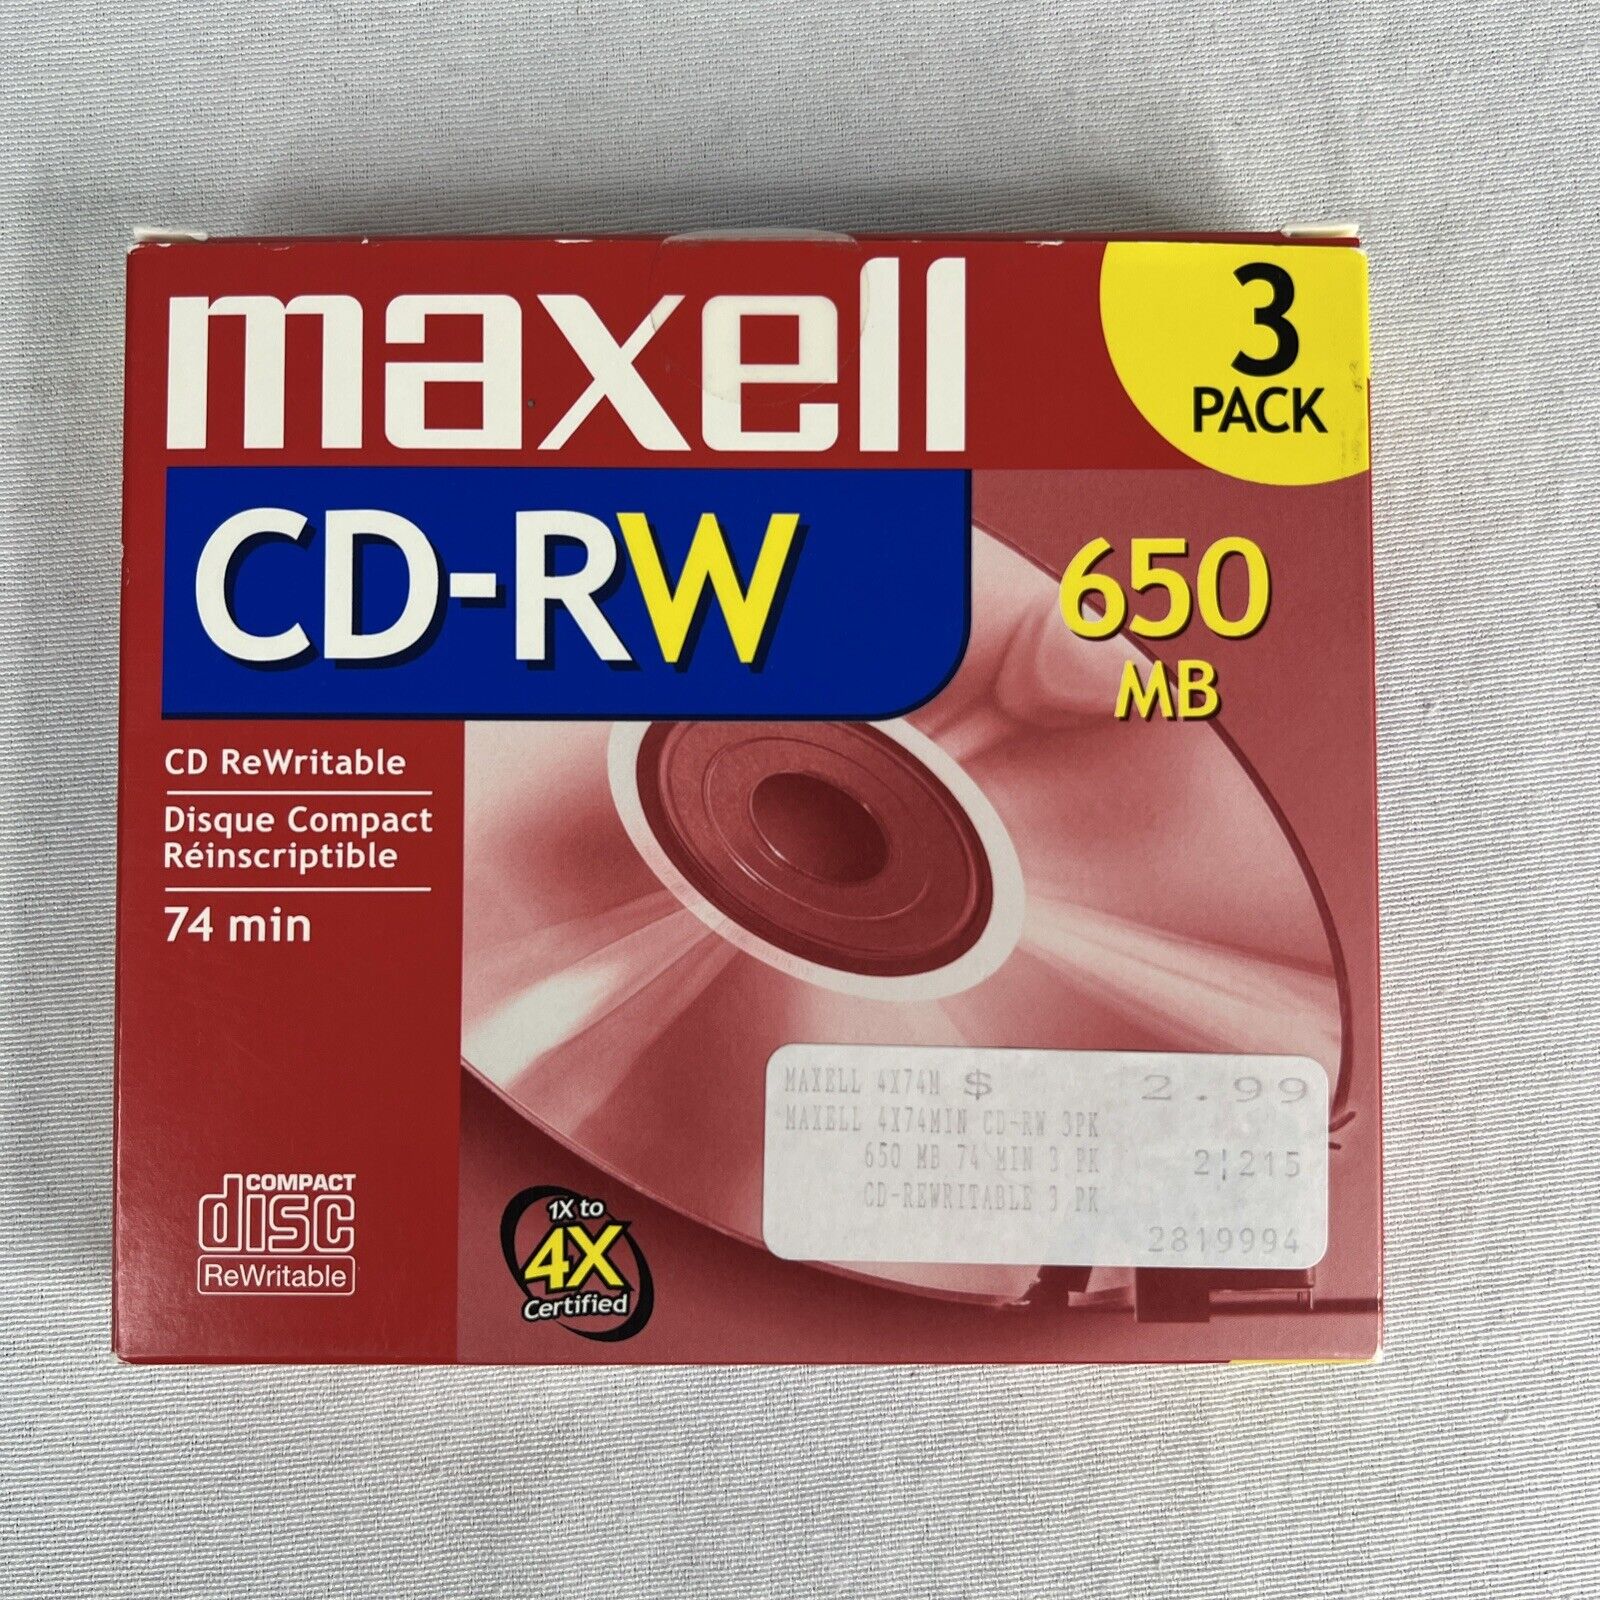 Maxell CD-RW 650 MB 74min ReWritable Compact Discs CDs #630030 3 Pack Unopened